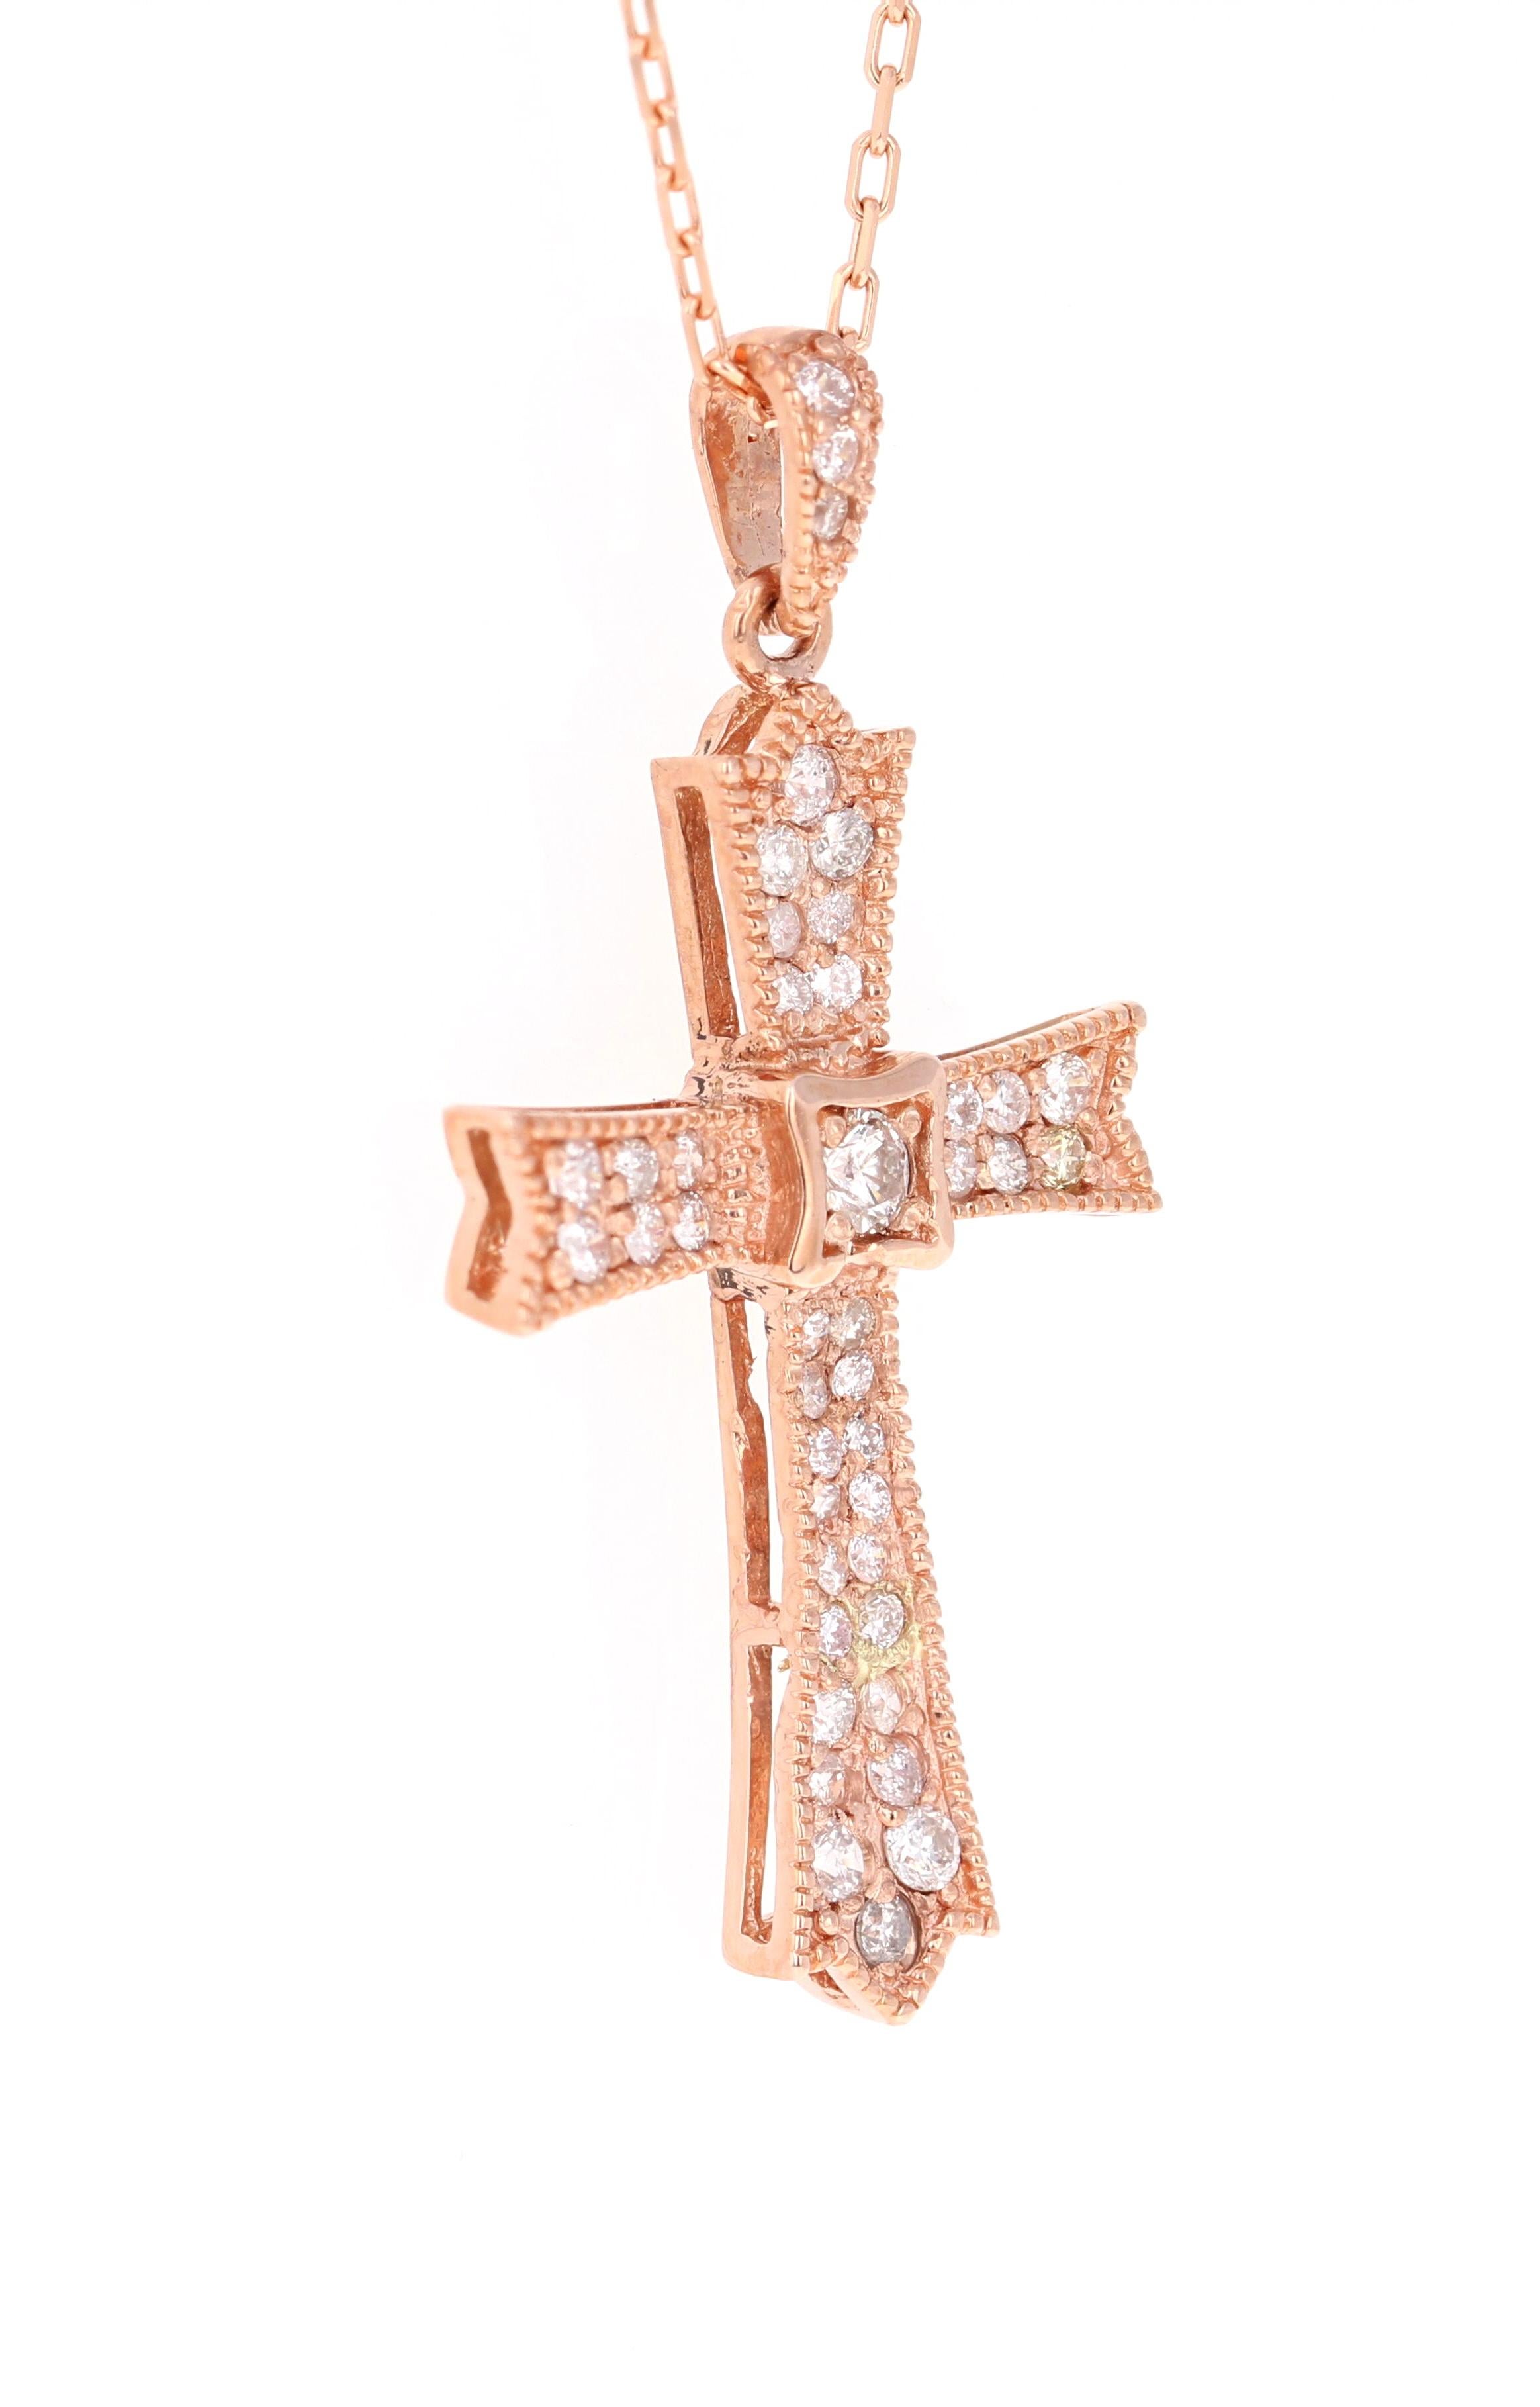 
This pendant has 42 Round Cut Diamonds that weigh 0.60 Carats. The clarity is SI and color is F. 

Made in 14K Rose Gold weighing approximately 5.1 grams.  

The chain is 8.5 inches in length and with the pendant it is 10 inches long.
